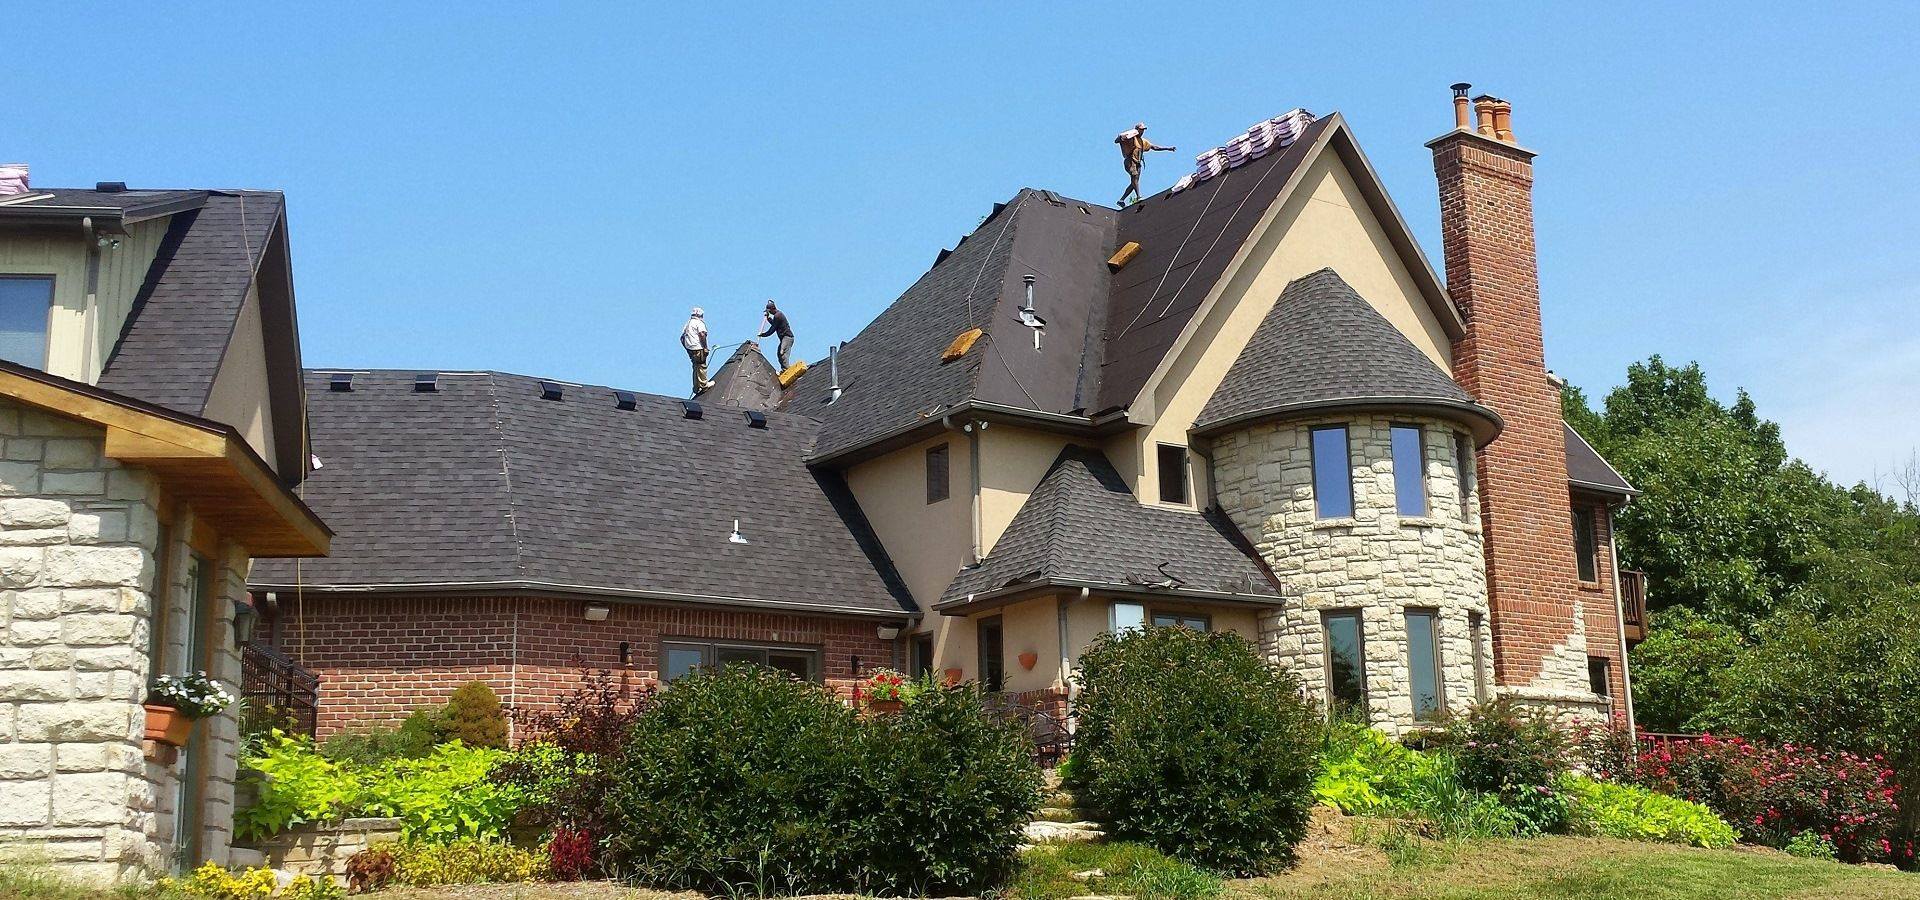 reroof in progress by ram roofing and remodeling in louisville kentucky